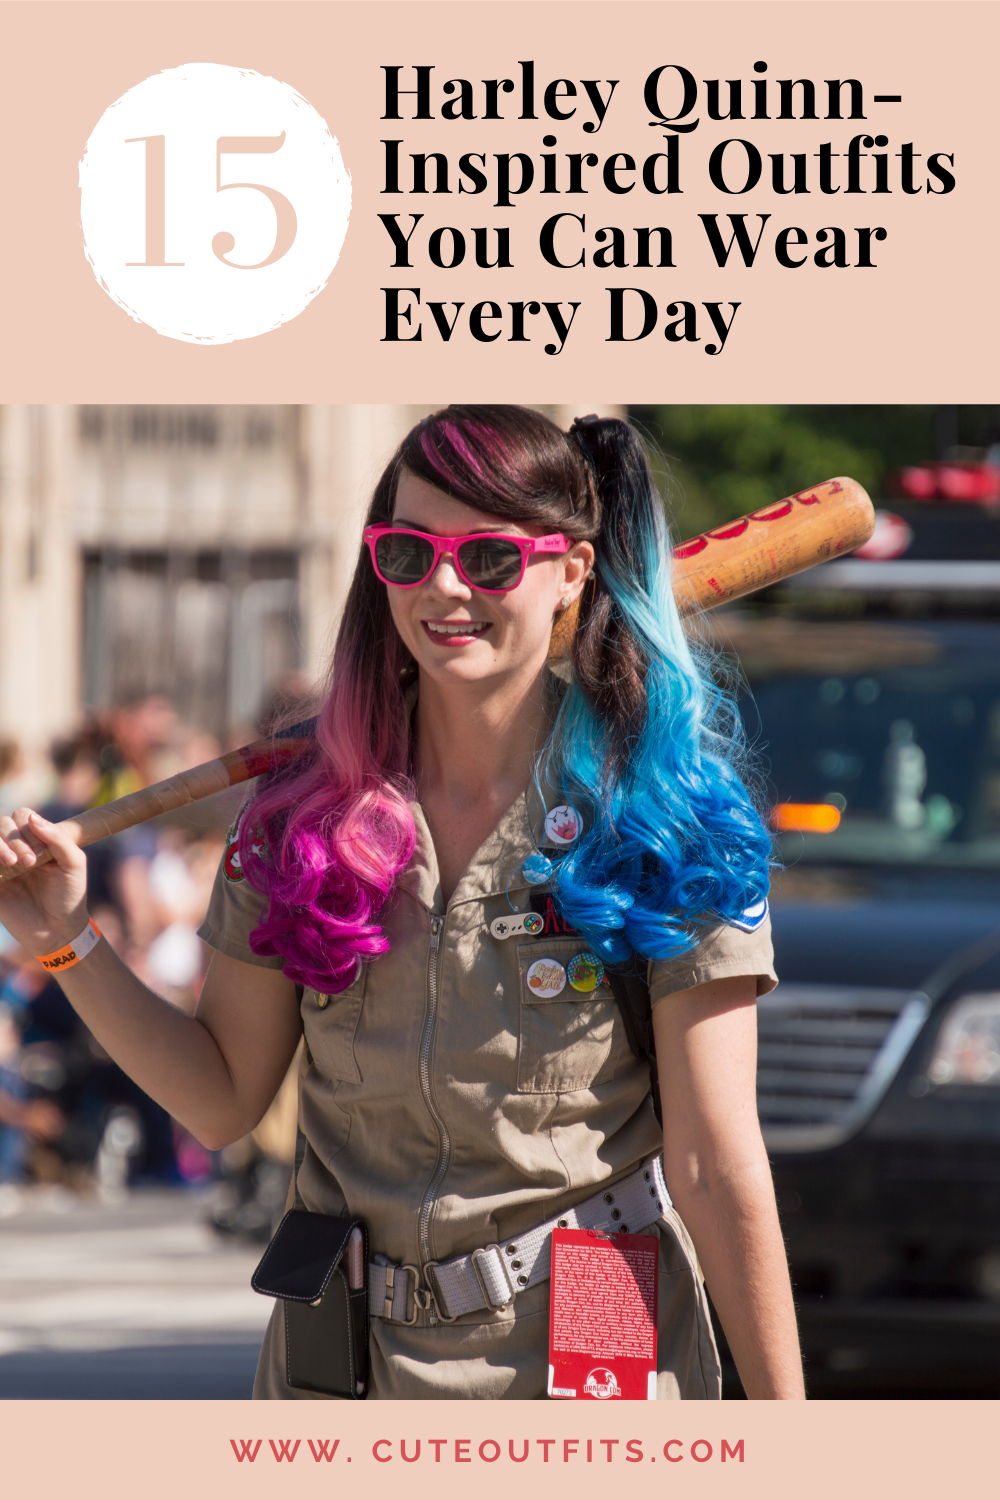 placard | Harley Quinn-Inspired Outfits You Can Wear Every Day